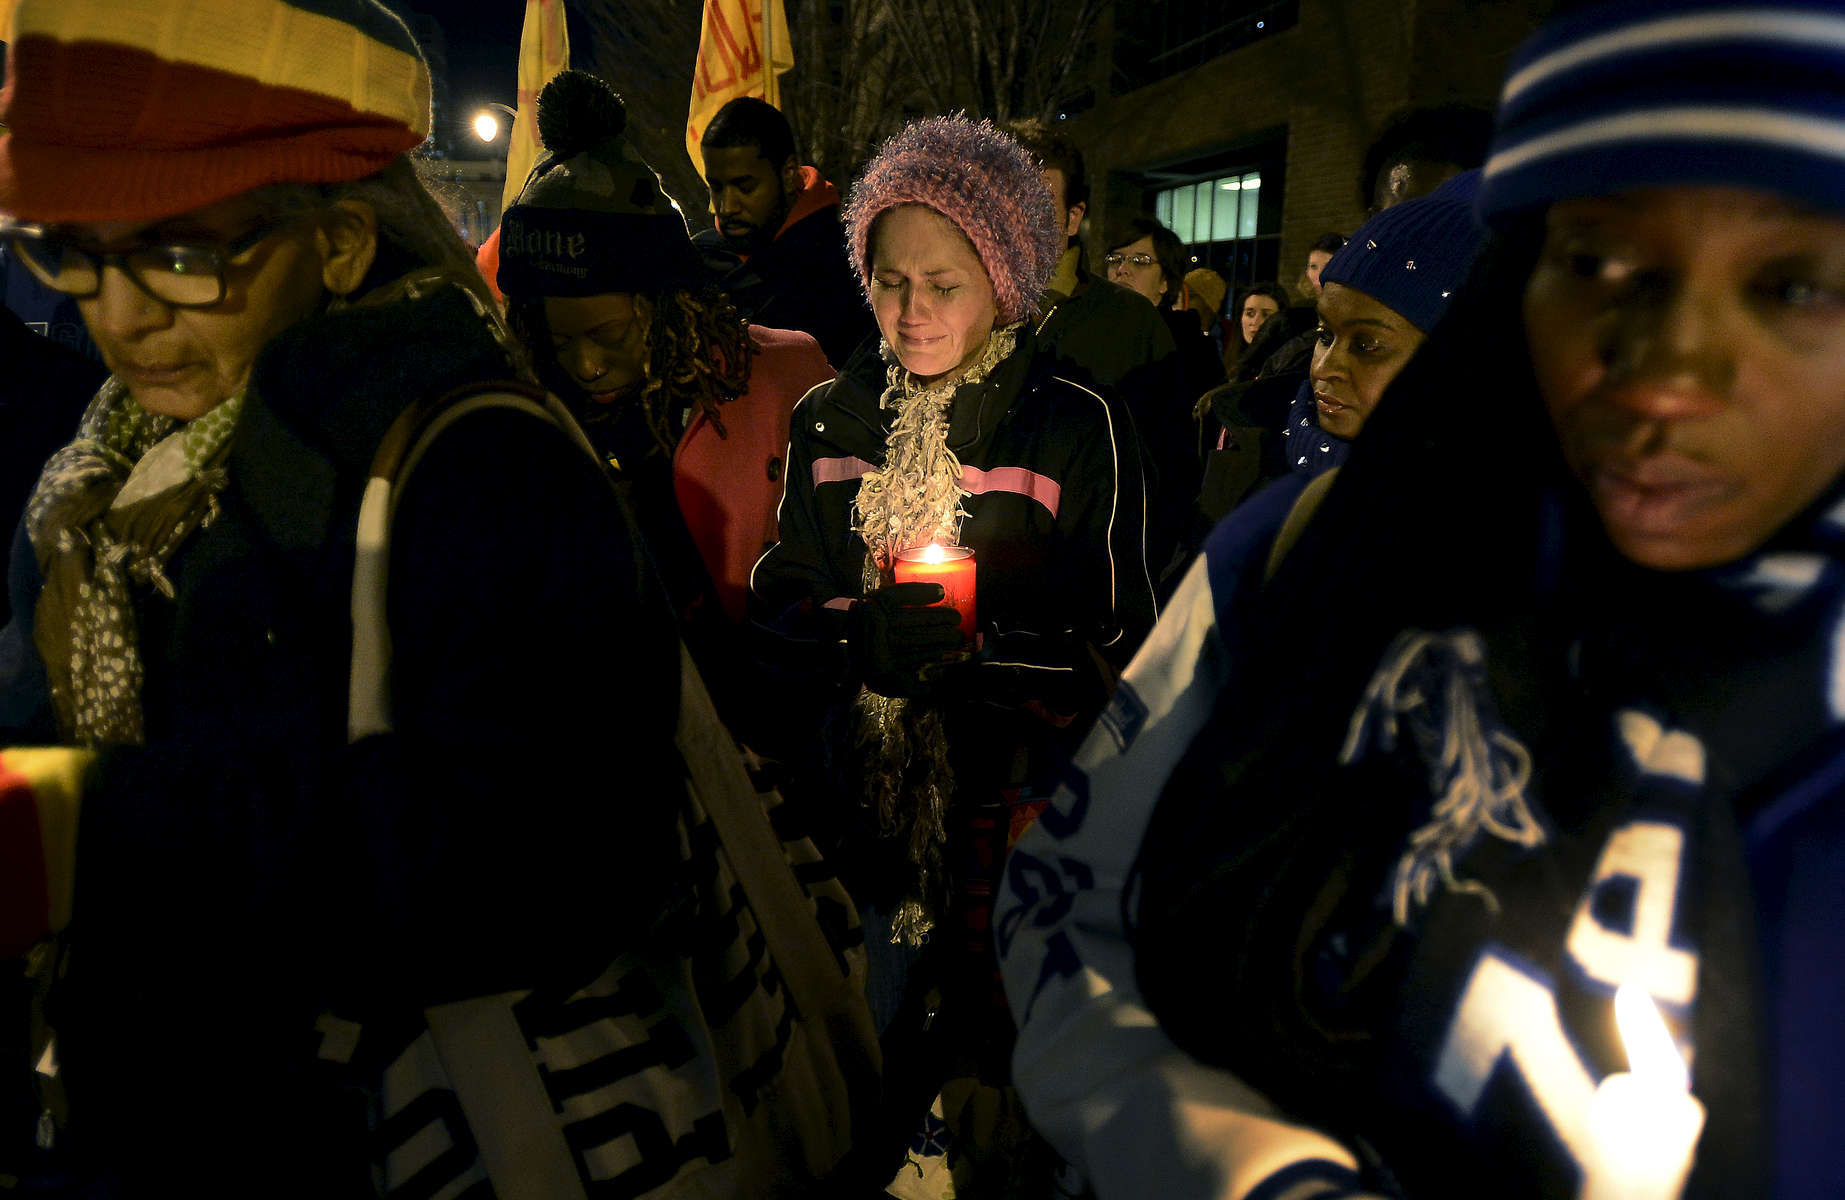 A woman cries during a candlelight vigil in Nashville, Tenn., after a New York grand jury decided not to indict the police officers involved in the death of Eric Garner. (The Tennessean/ Mark Zaleski) 